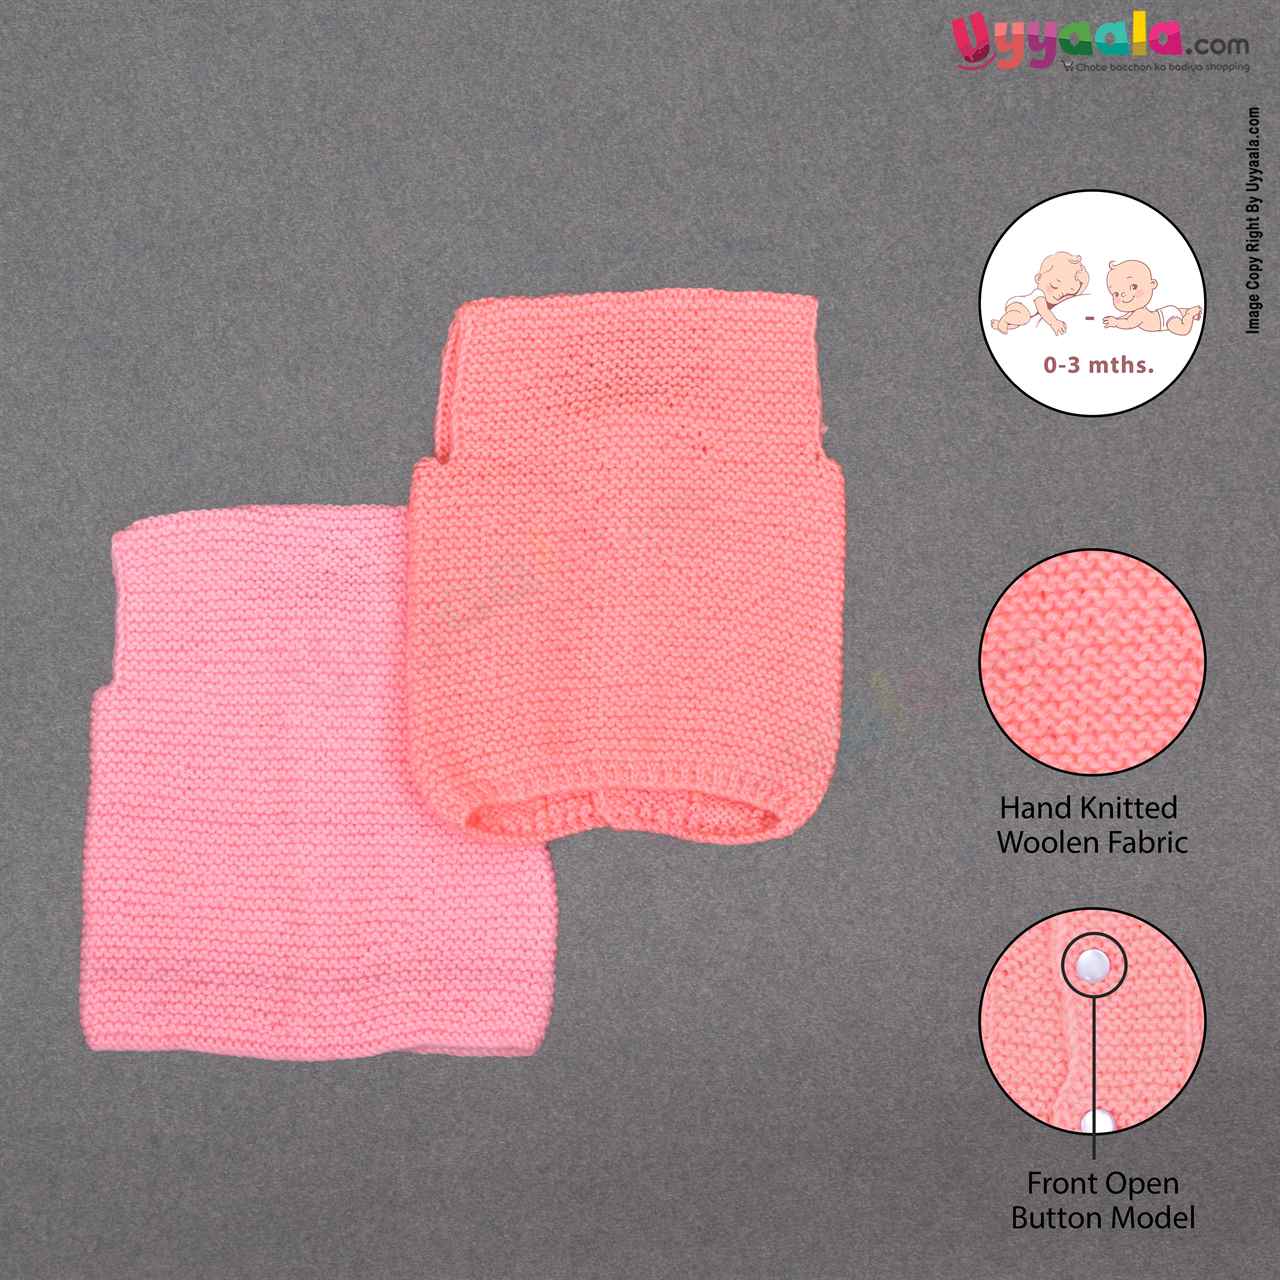 Front Open Sweaters For 0-3m Babies